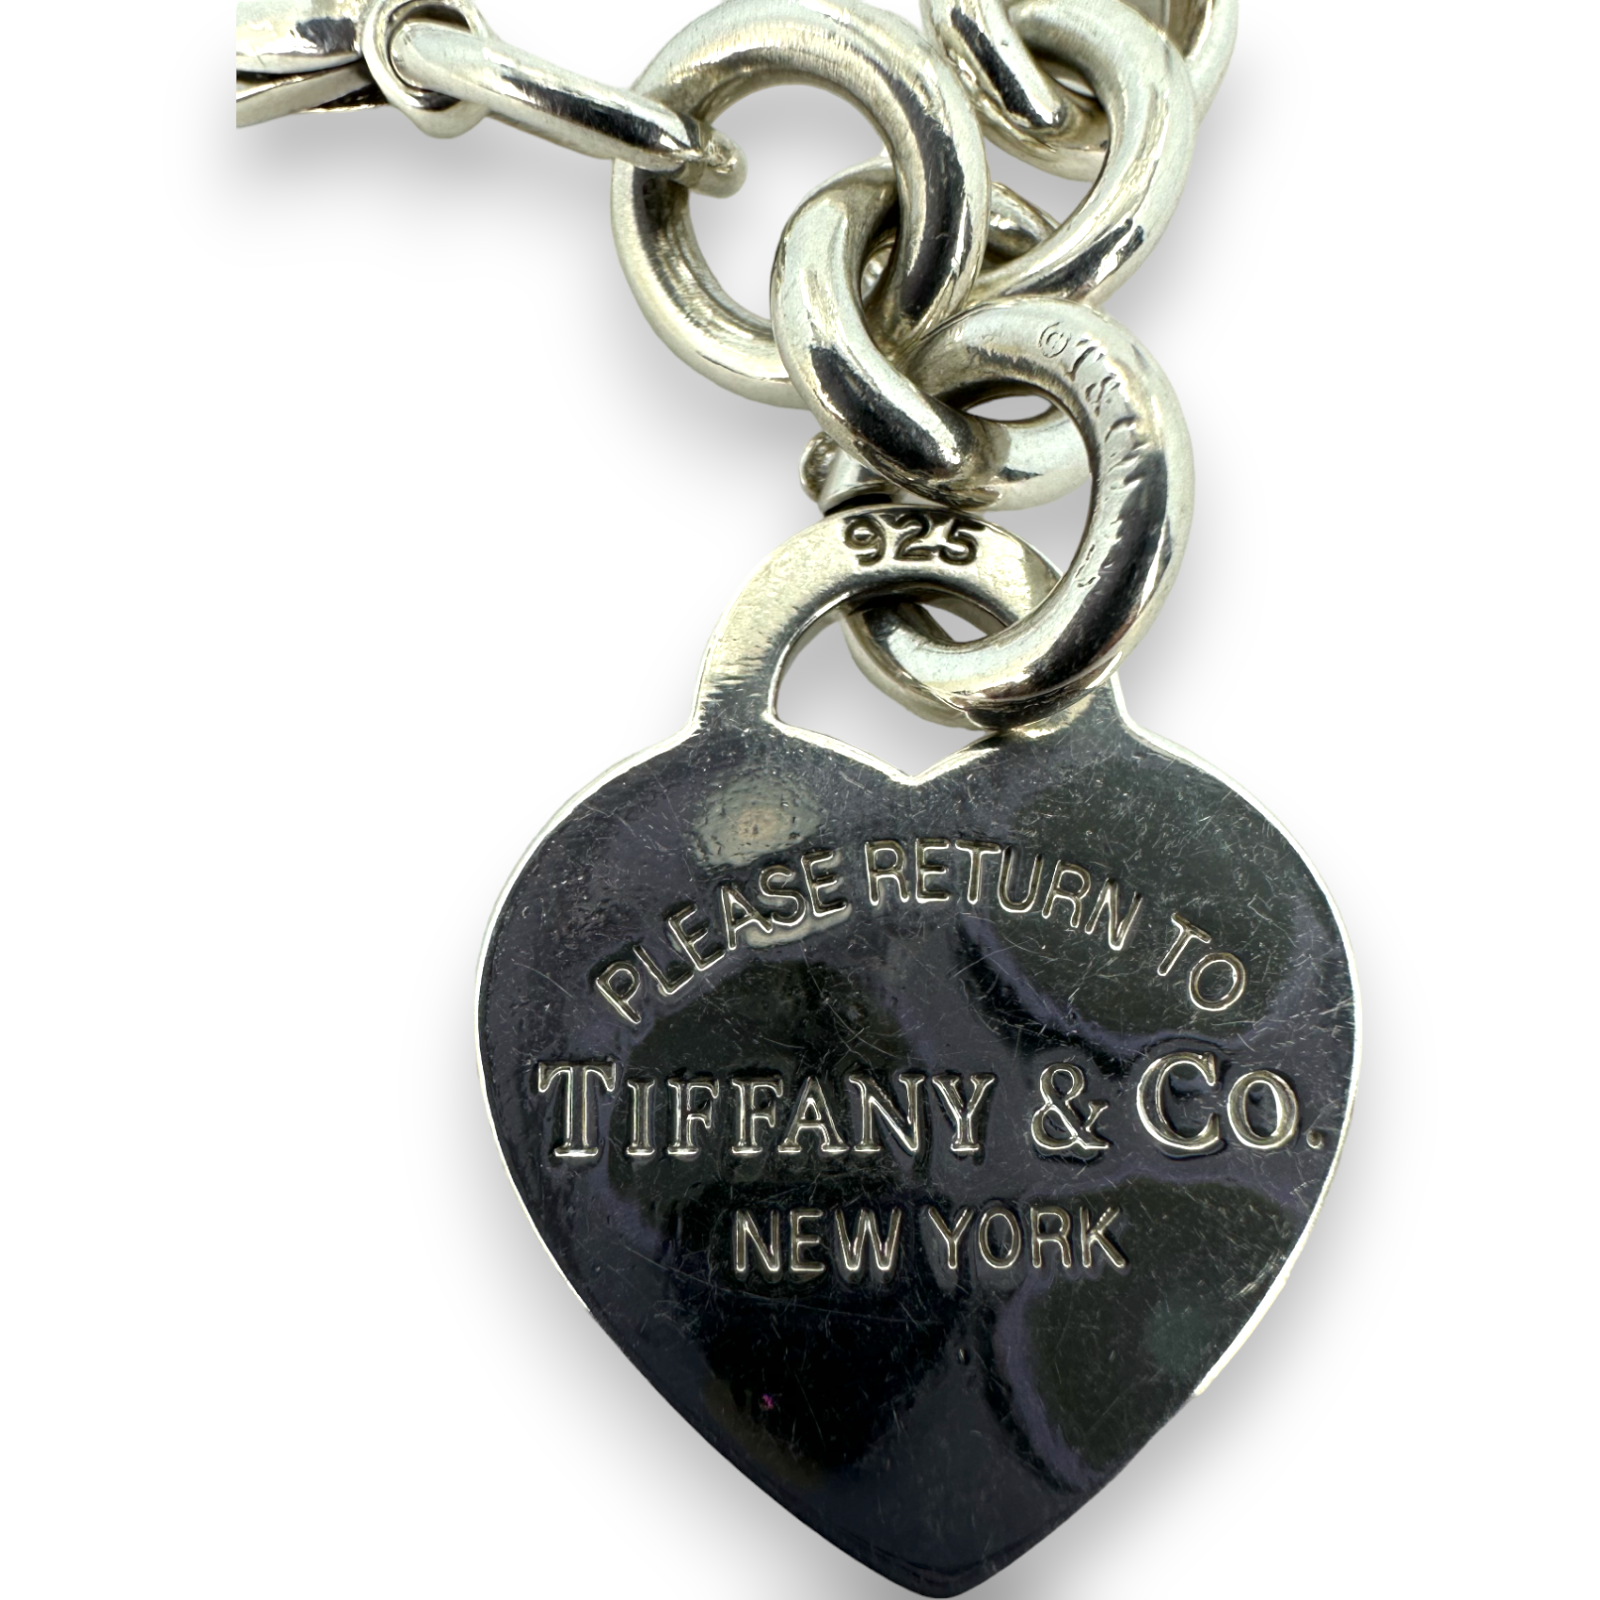 Tiffany & Co Return to Heart Charm Pendant 925 Sterling Silver 